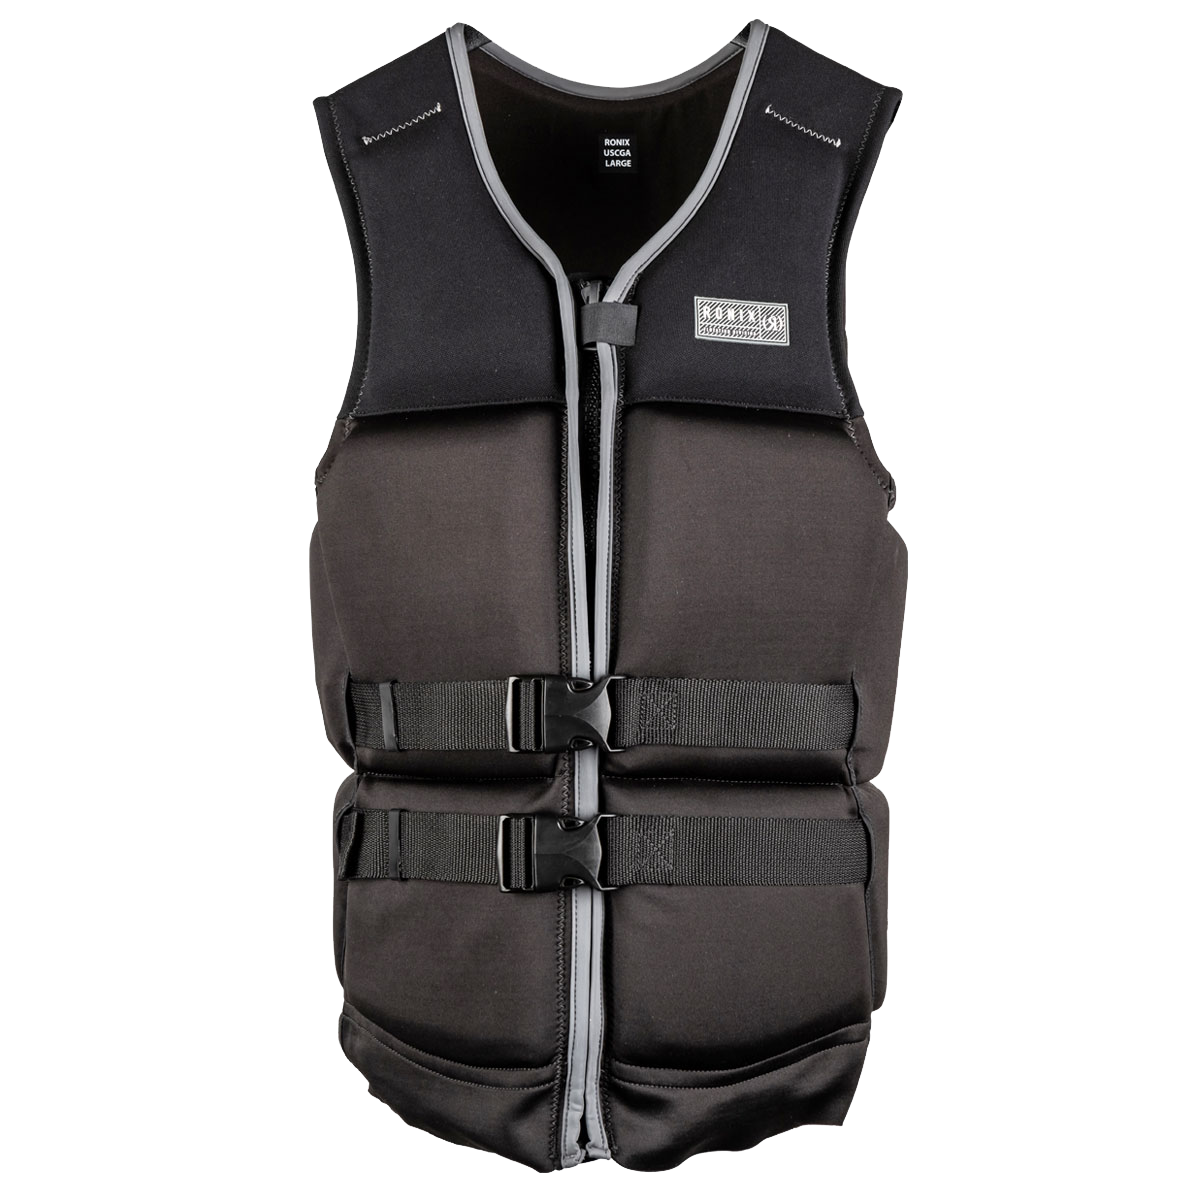 A Ronix Koal Capella 3.0 CGA Men's Vest with a comfortable design in black and grey.